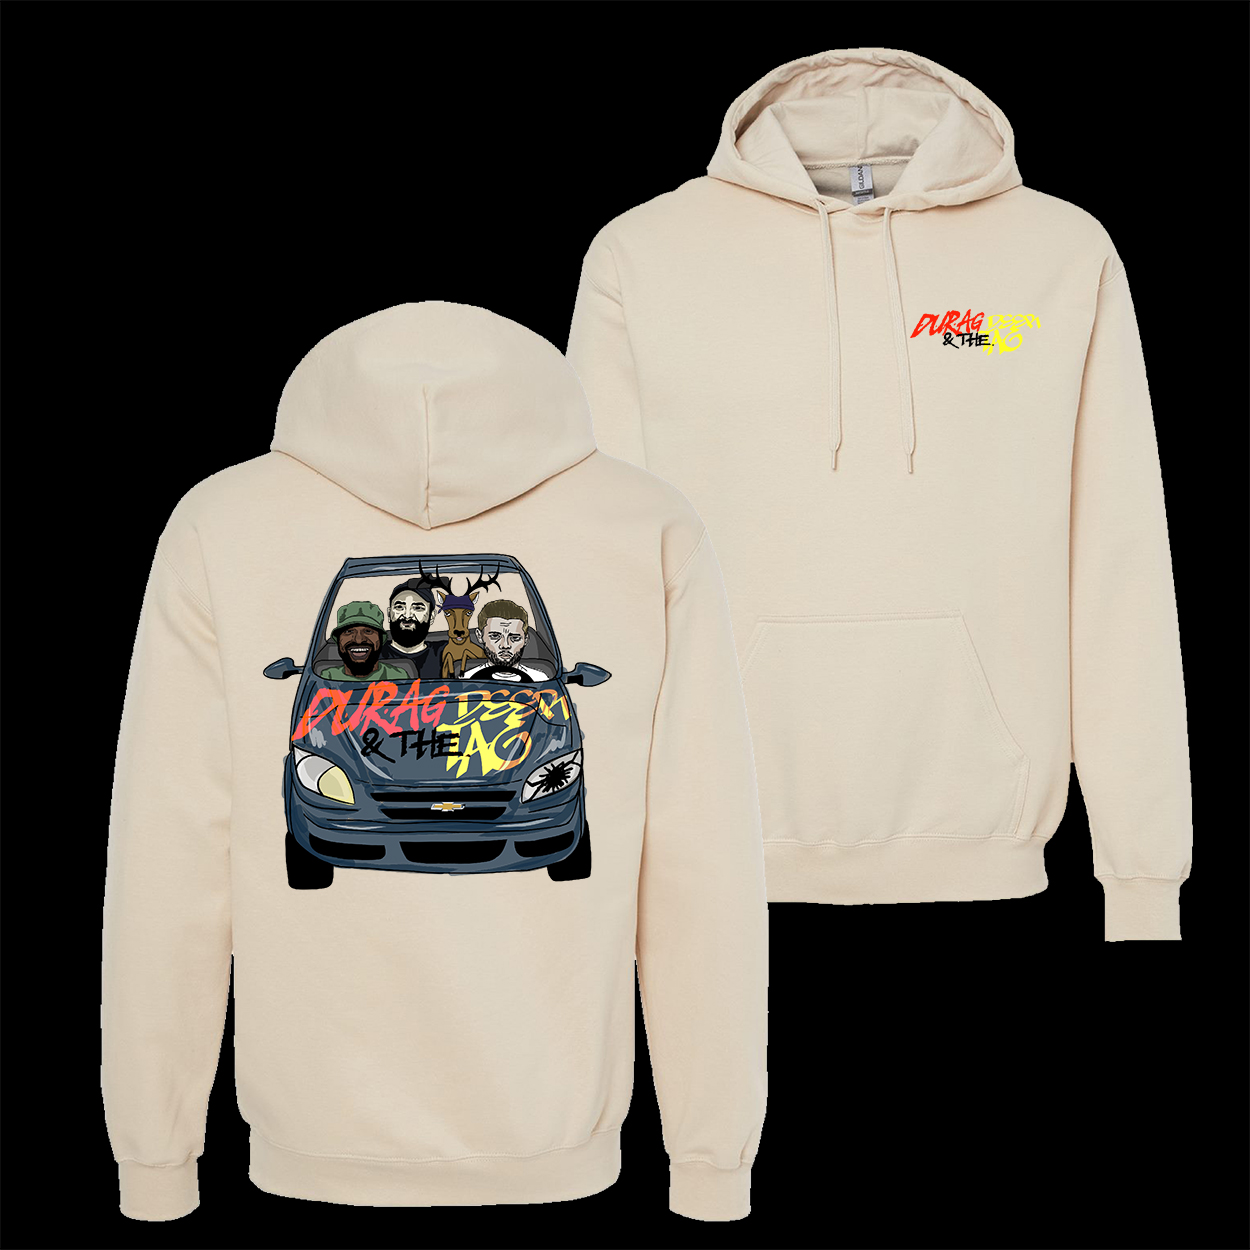 Sand Hoodie from the Durag and the Deer tag Podcast with the Hooptie design